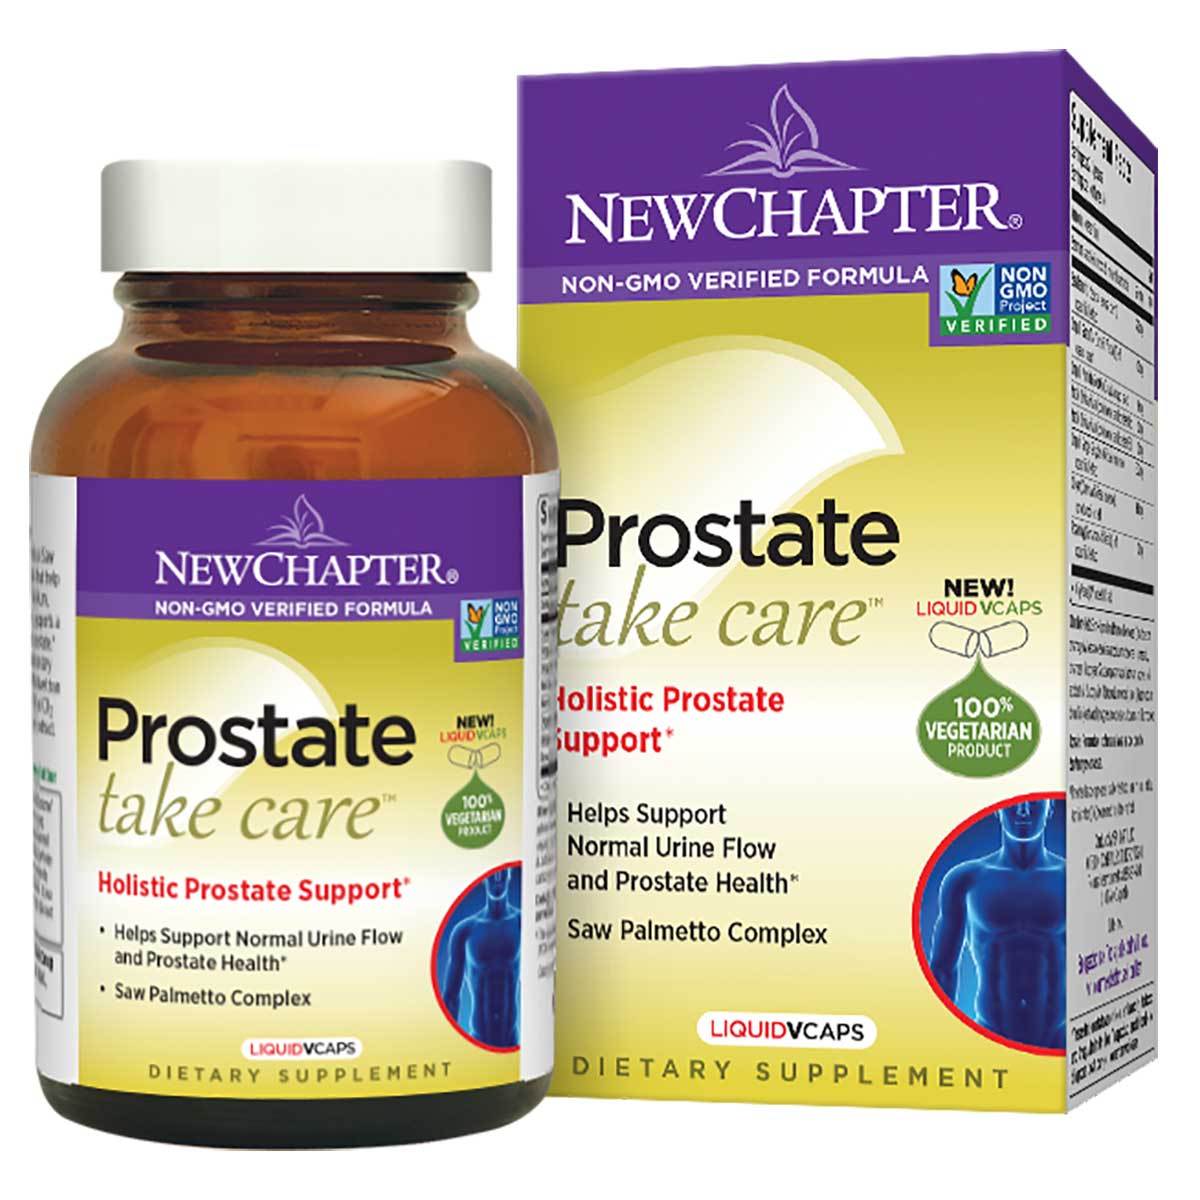 New Chapter Prostate Take Care reducing Prostate Cancer